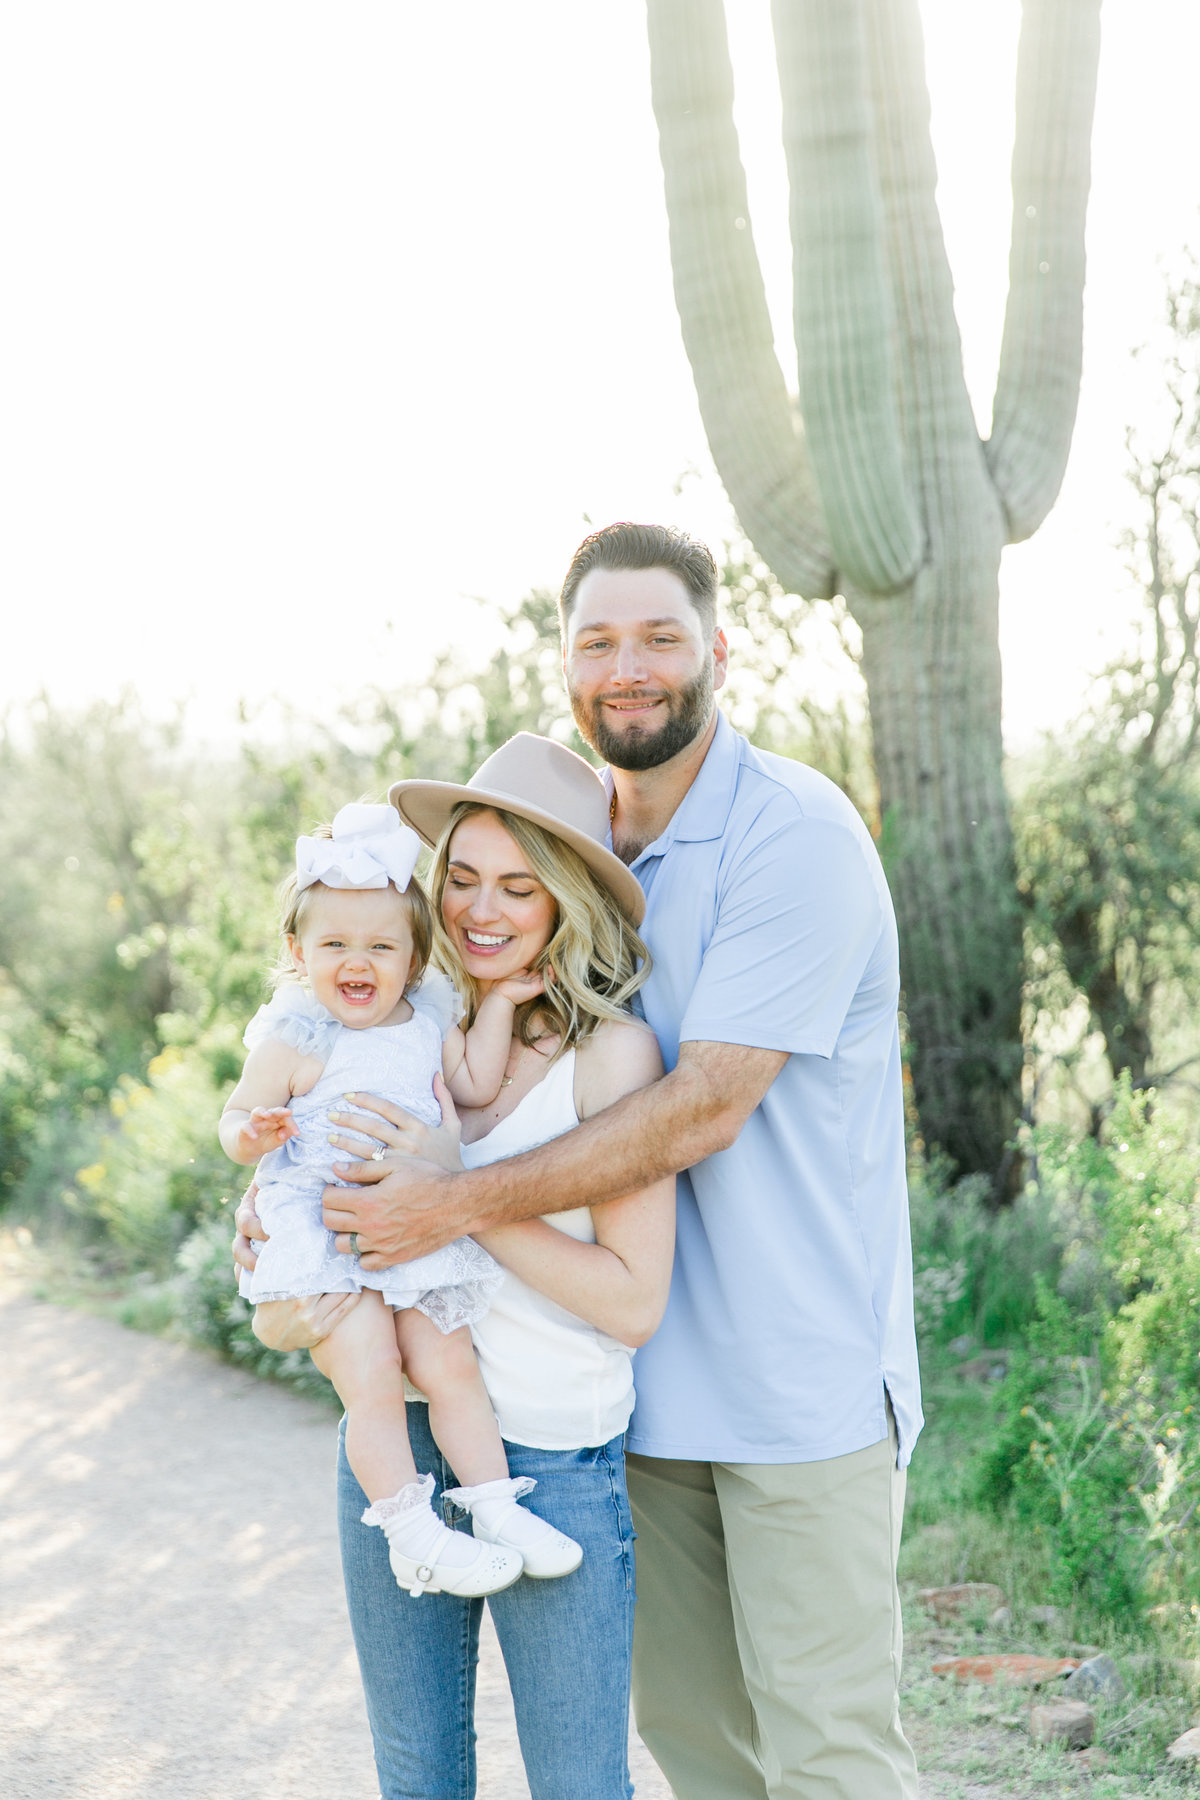 Karlie Colleen Photography - Scottsdale family photography - Dymin & family-131